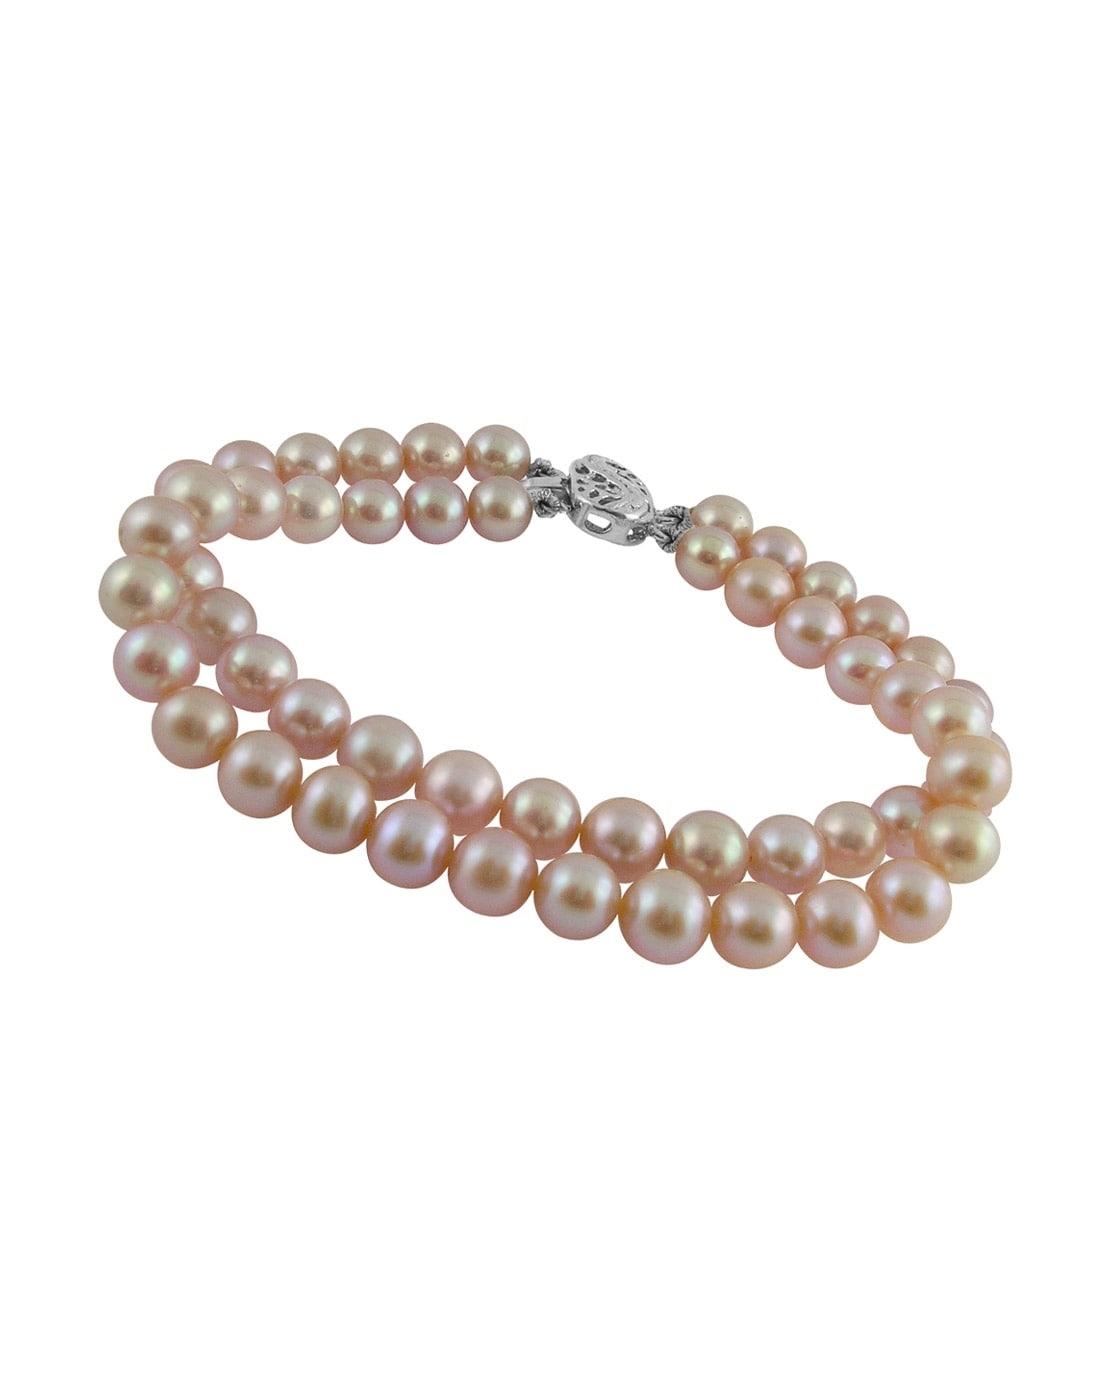 Lovely 11.5mm Pink Saltwater Pearl Bracelet with 14k White Gold Clasp -  Ruby Lane